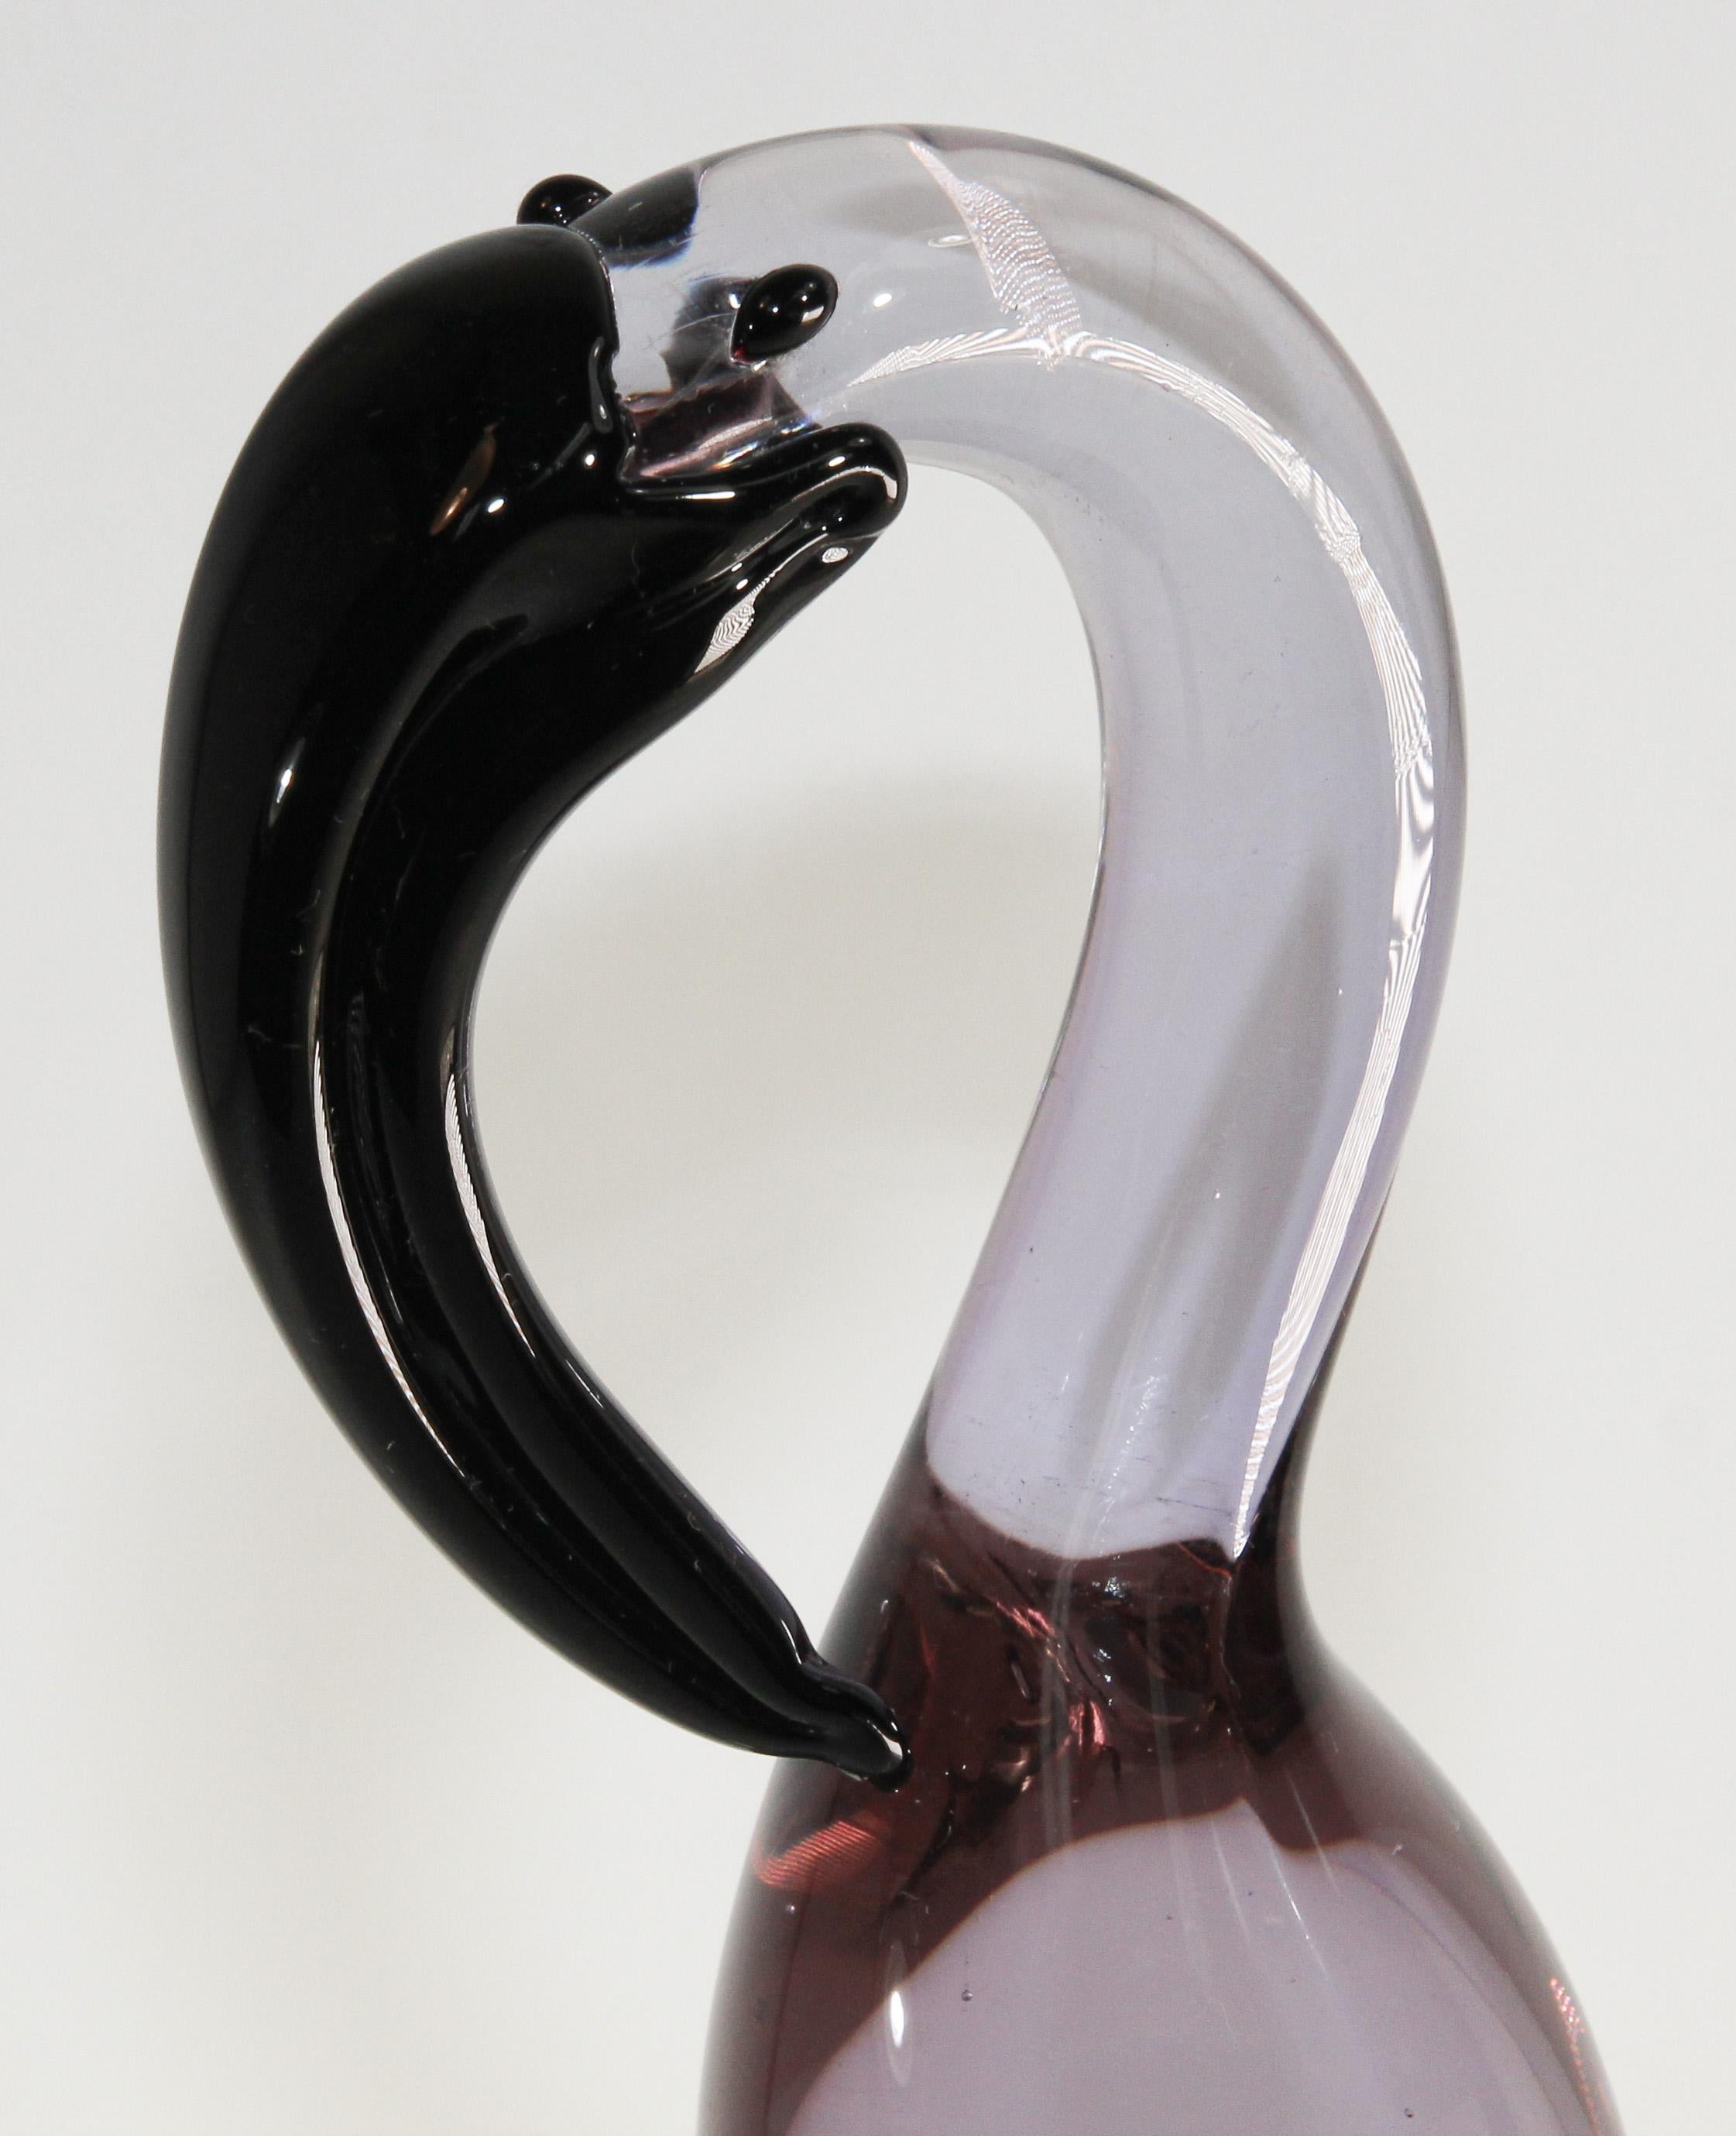 Murano Art Glass Crane Sculpture Hand Blown Venetian Italian Crystal Glass In Good Condition For Sale In North Hollywood, CA